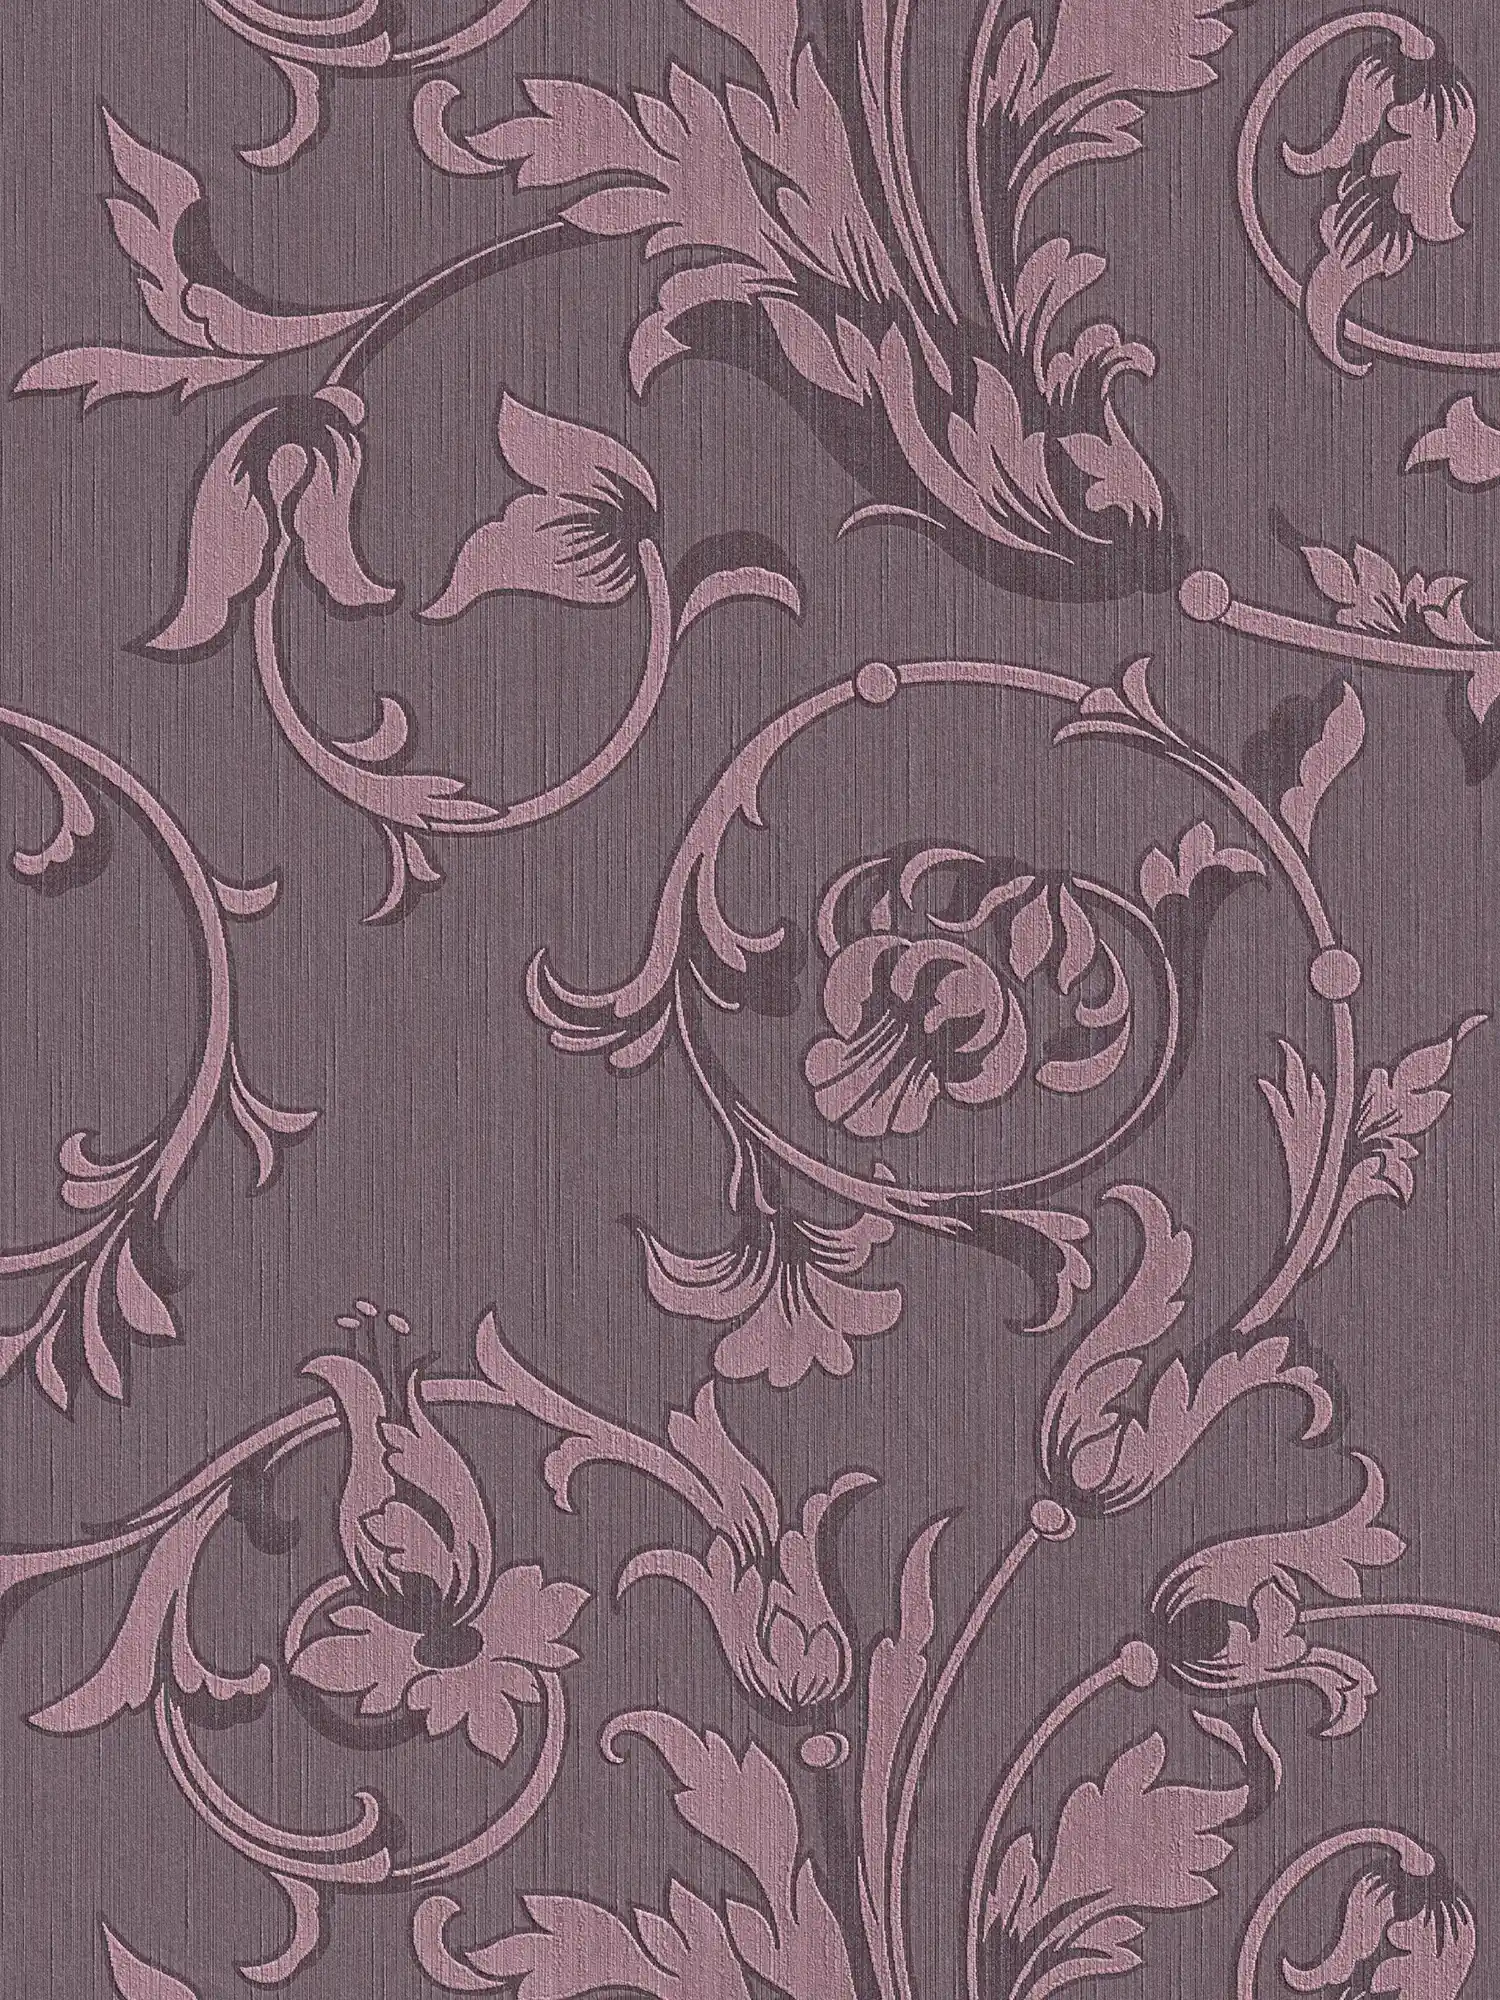 Ornament wallpaper with silk textile look - purple
